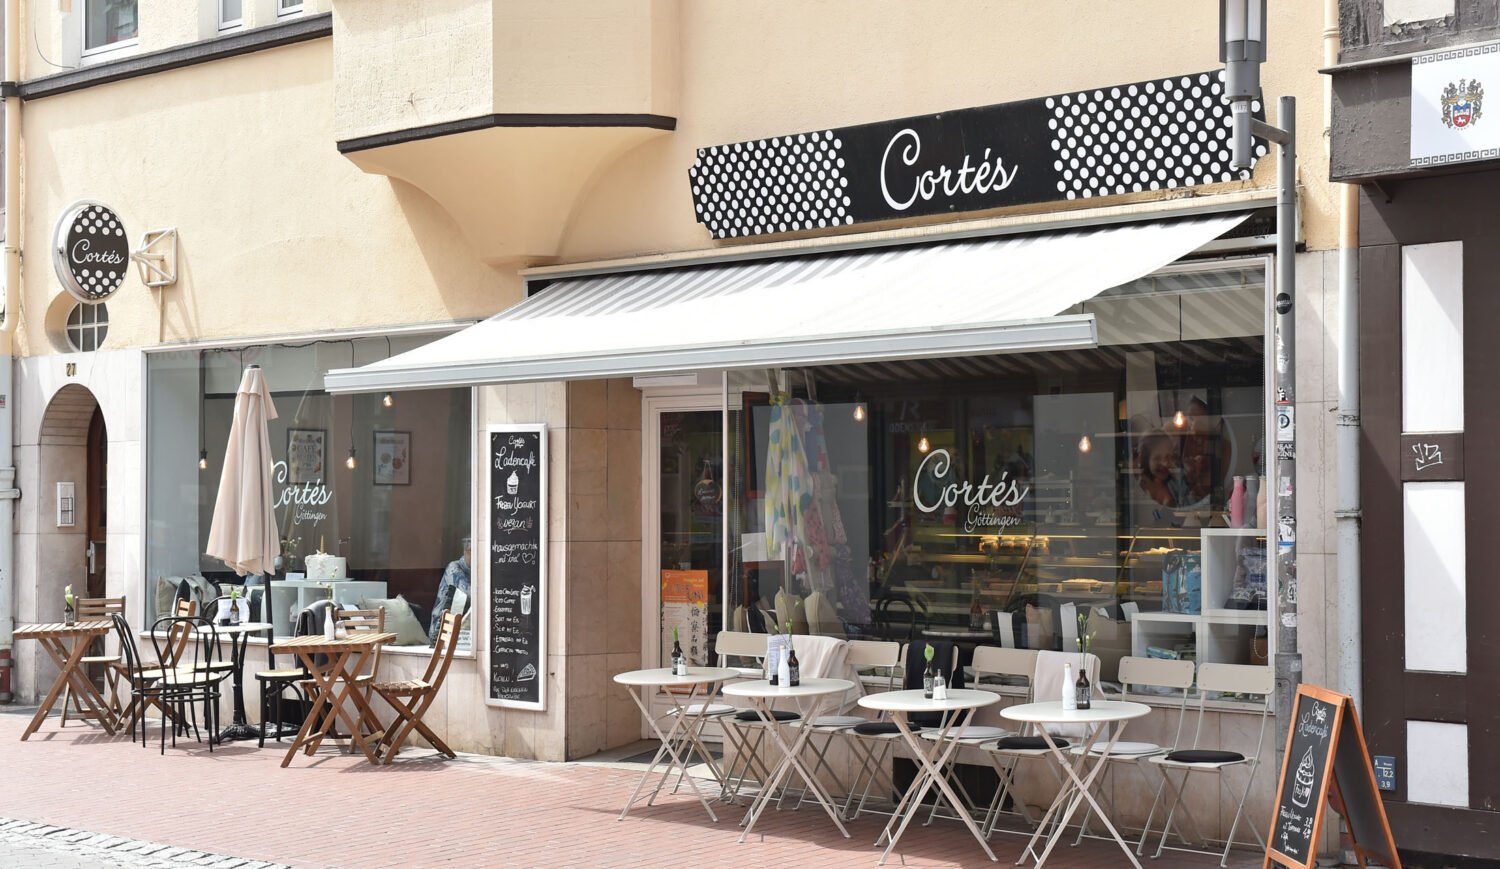 The Café Cortés has been repeatedly awarded by the magazine 